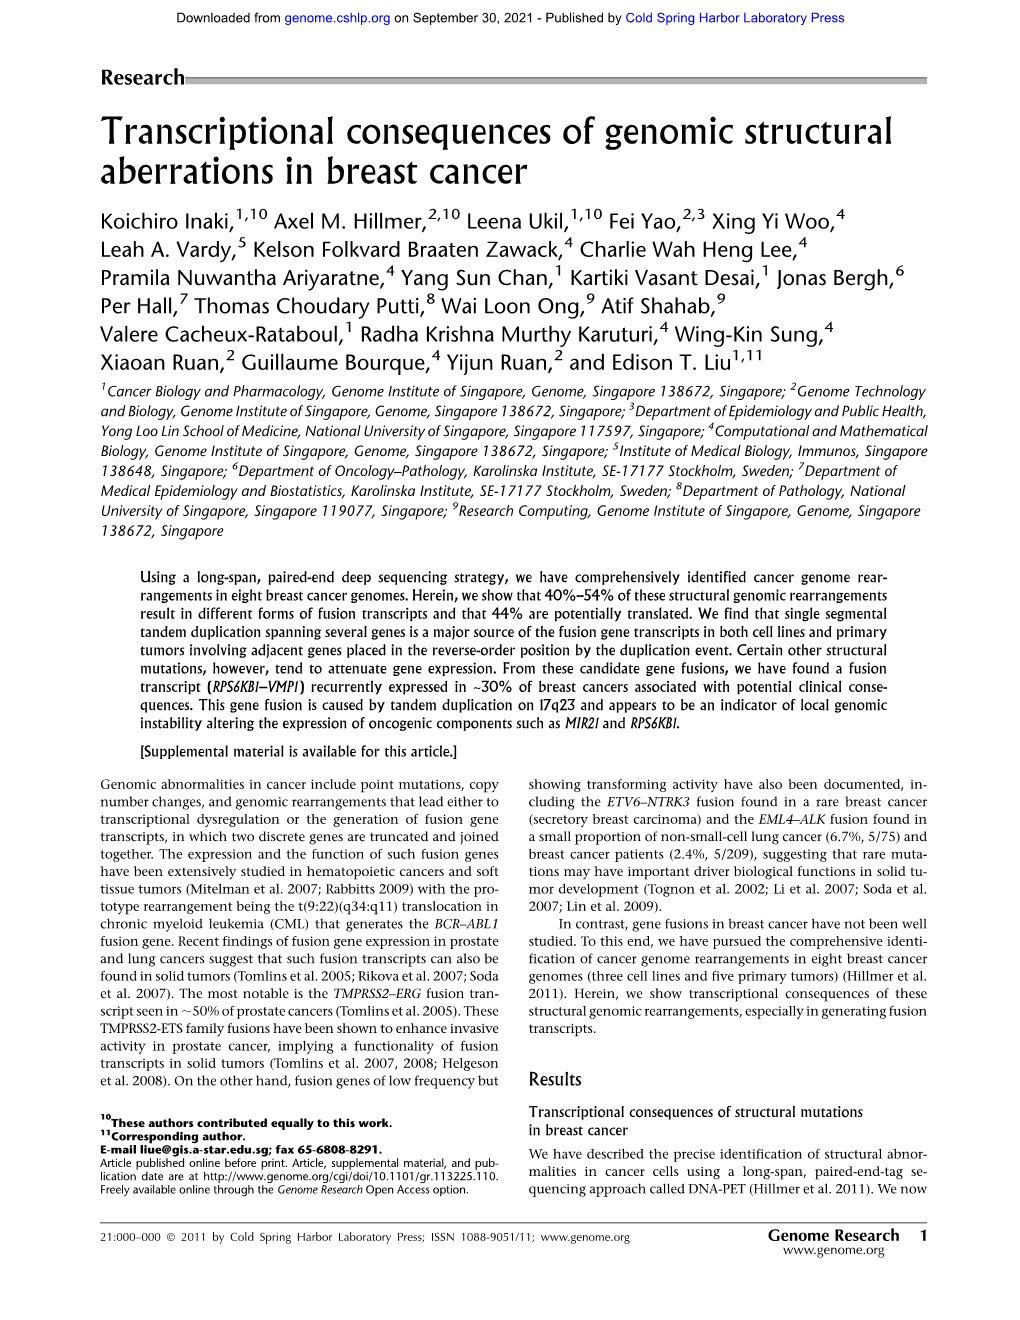 Transcriptional Consequences of Genomic Structural Aberrations in Breast Cancer